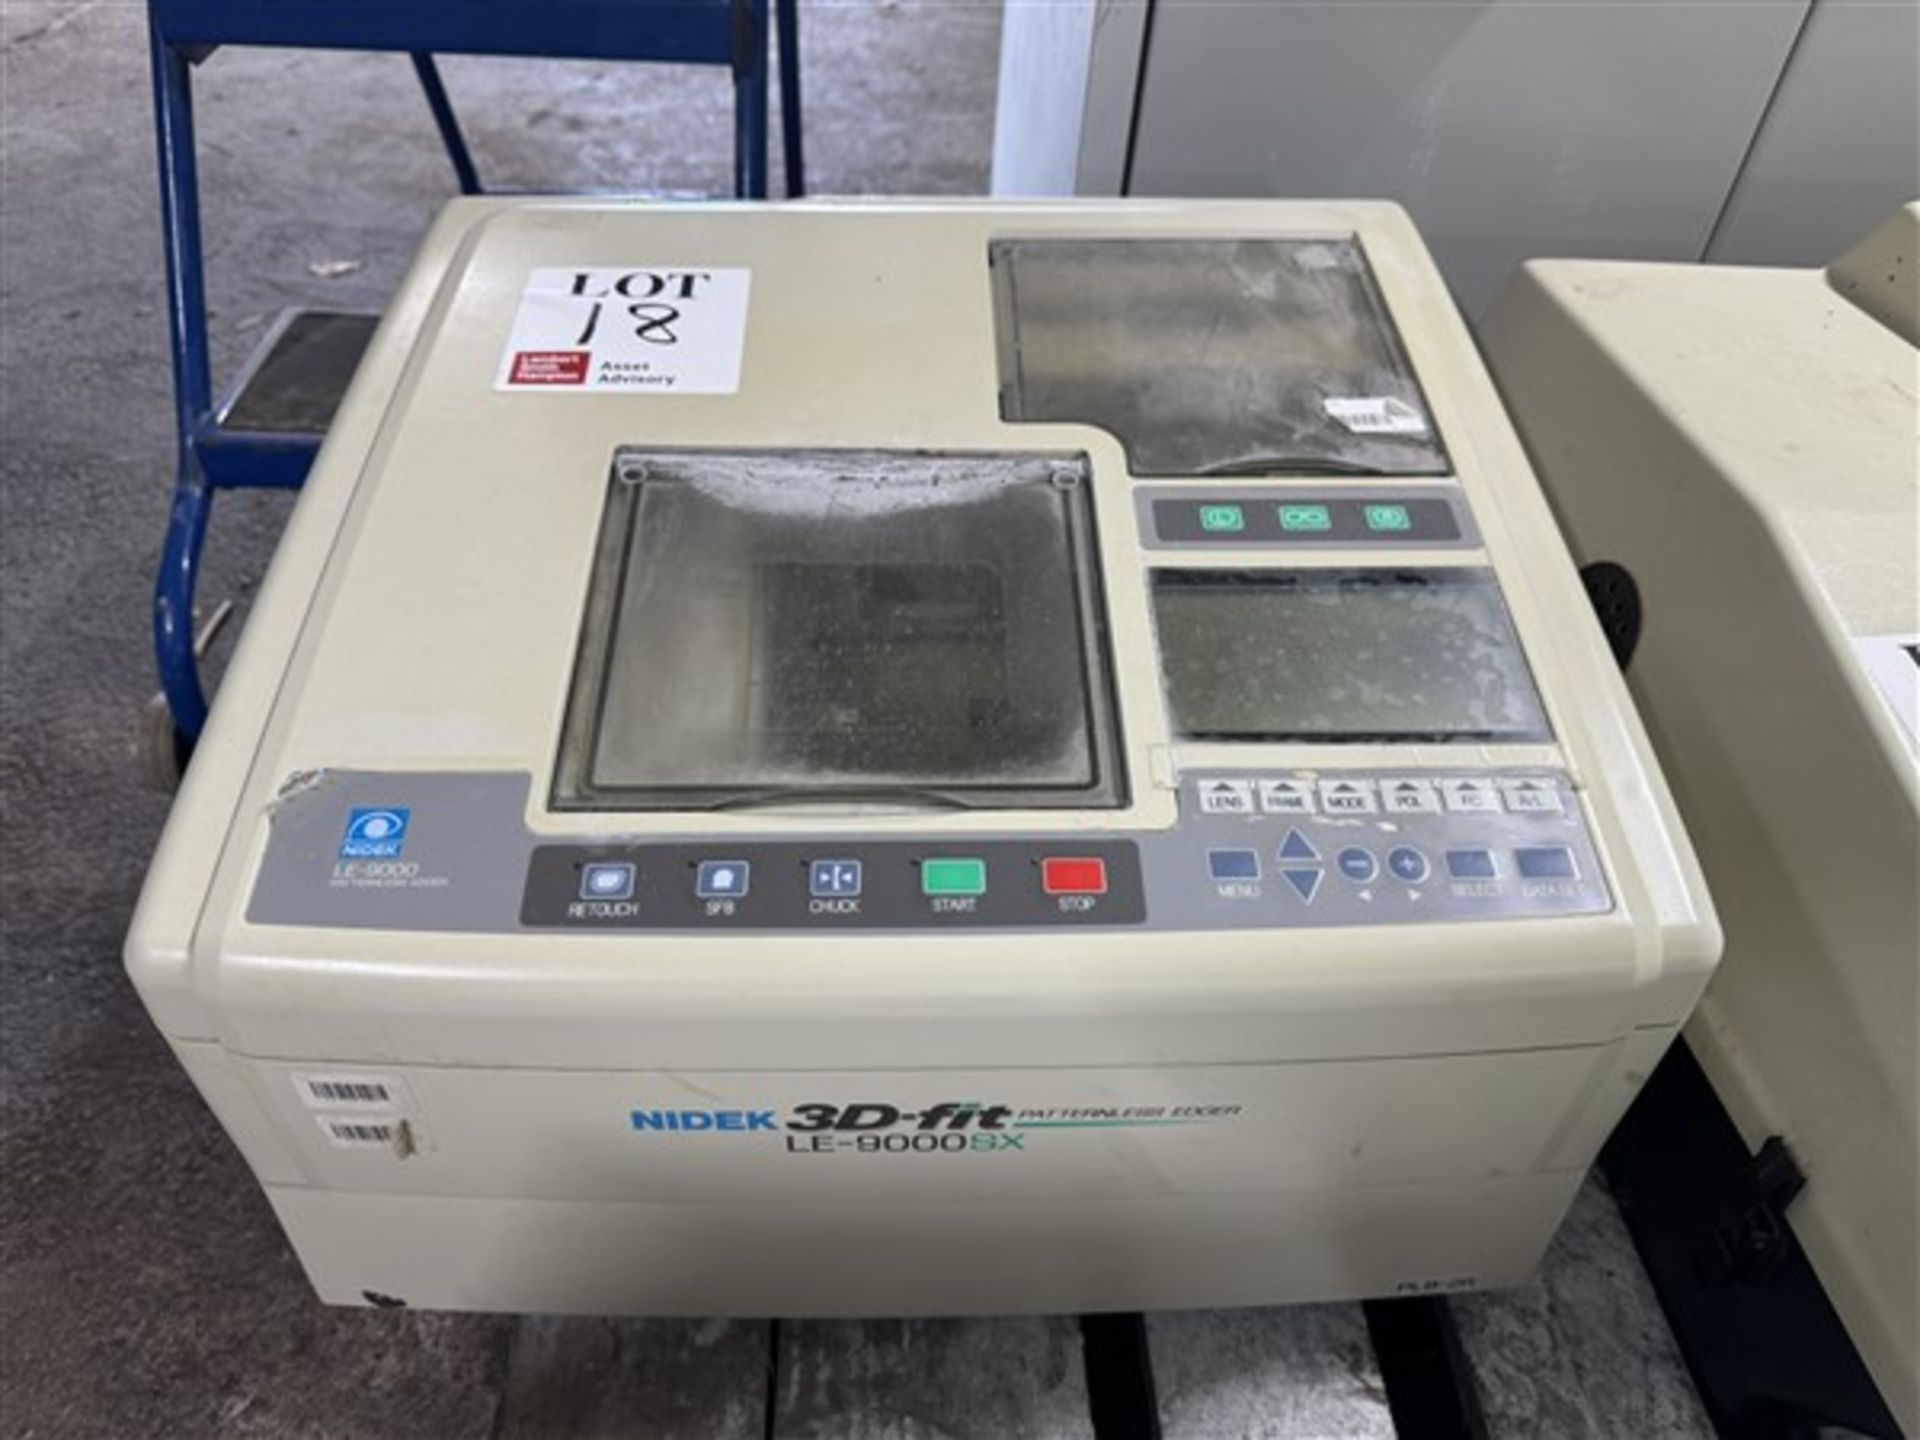 Nidek 3D-Fit patternless edger, model LE-9000 SX (Please note, this LOT is sold as spares)